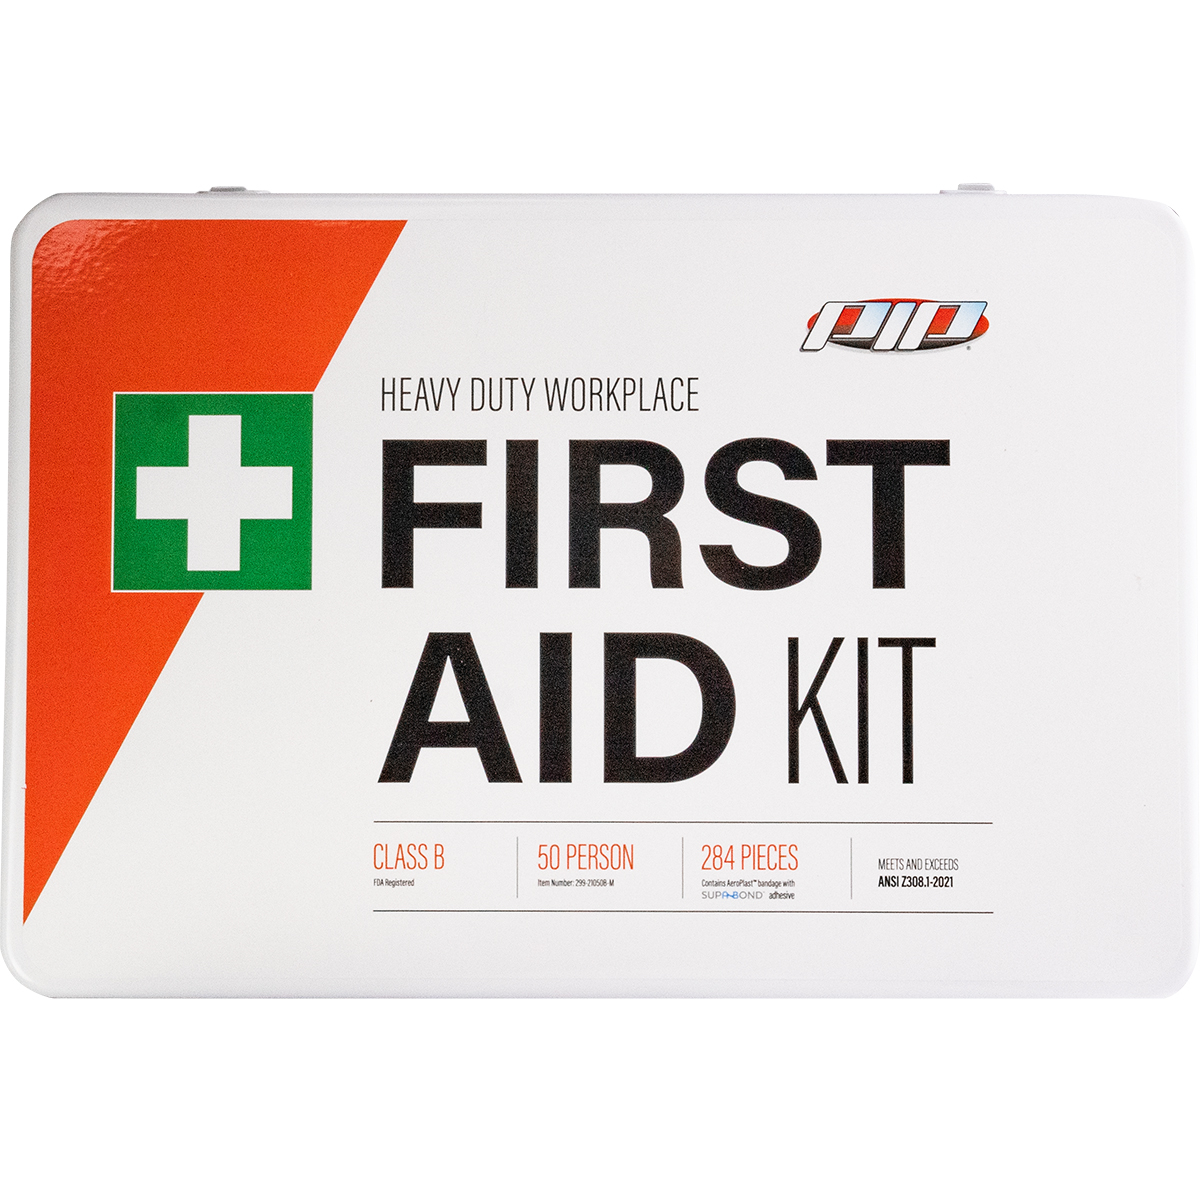 Pip ANSI Class B Metal First Aid Kit - 50 Person from GME Supply